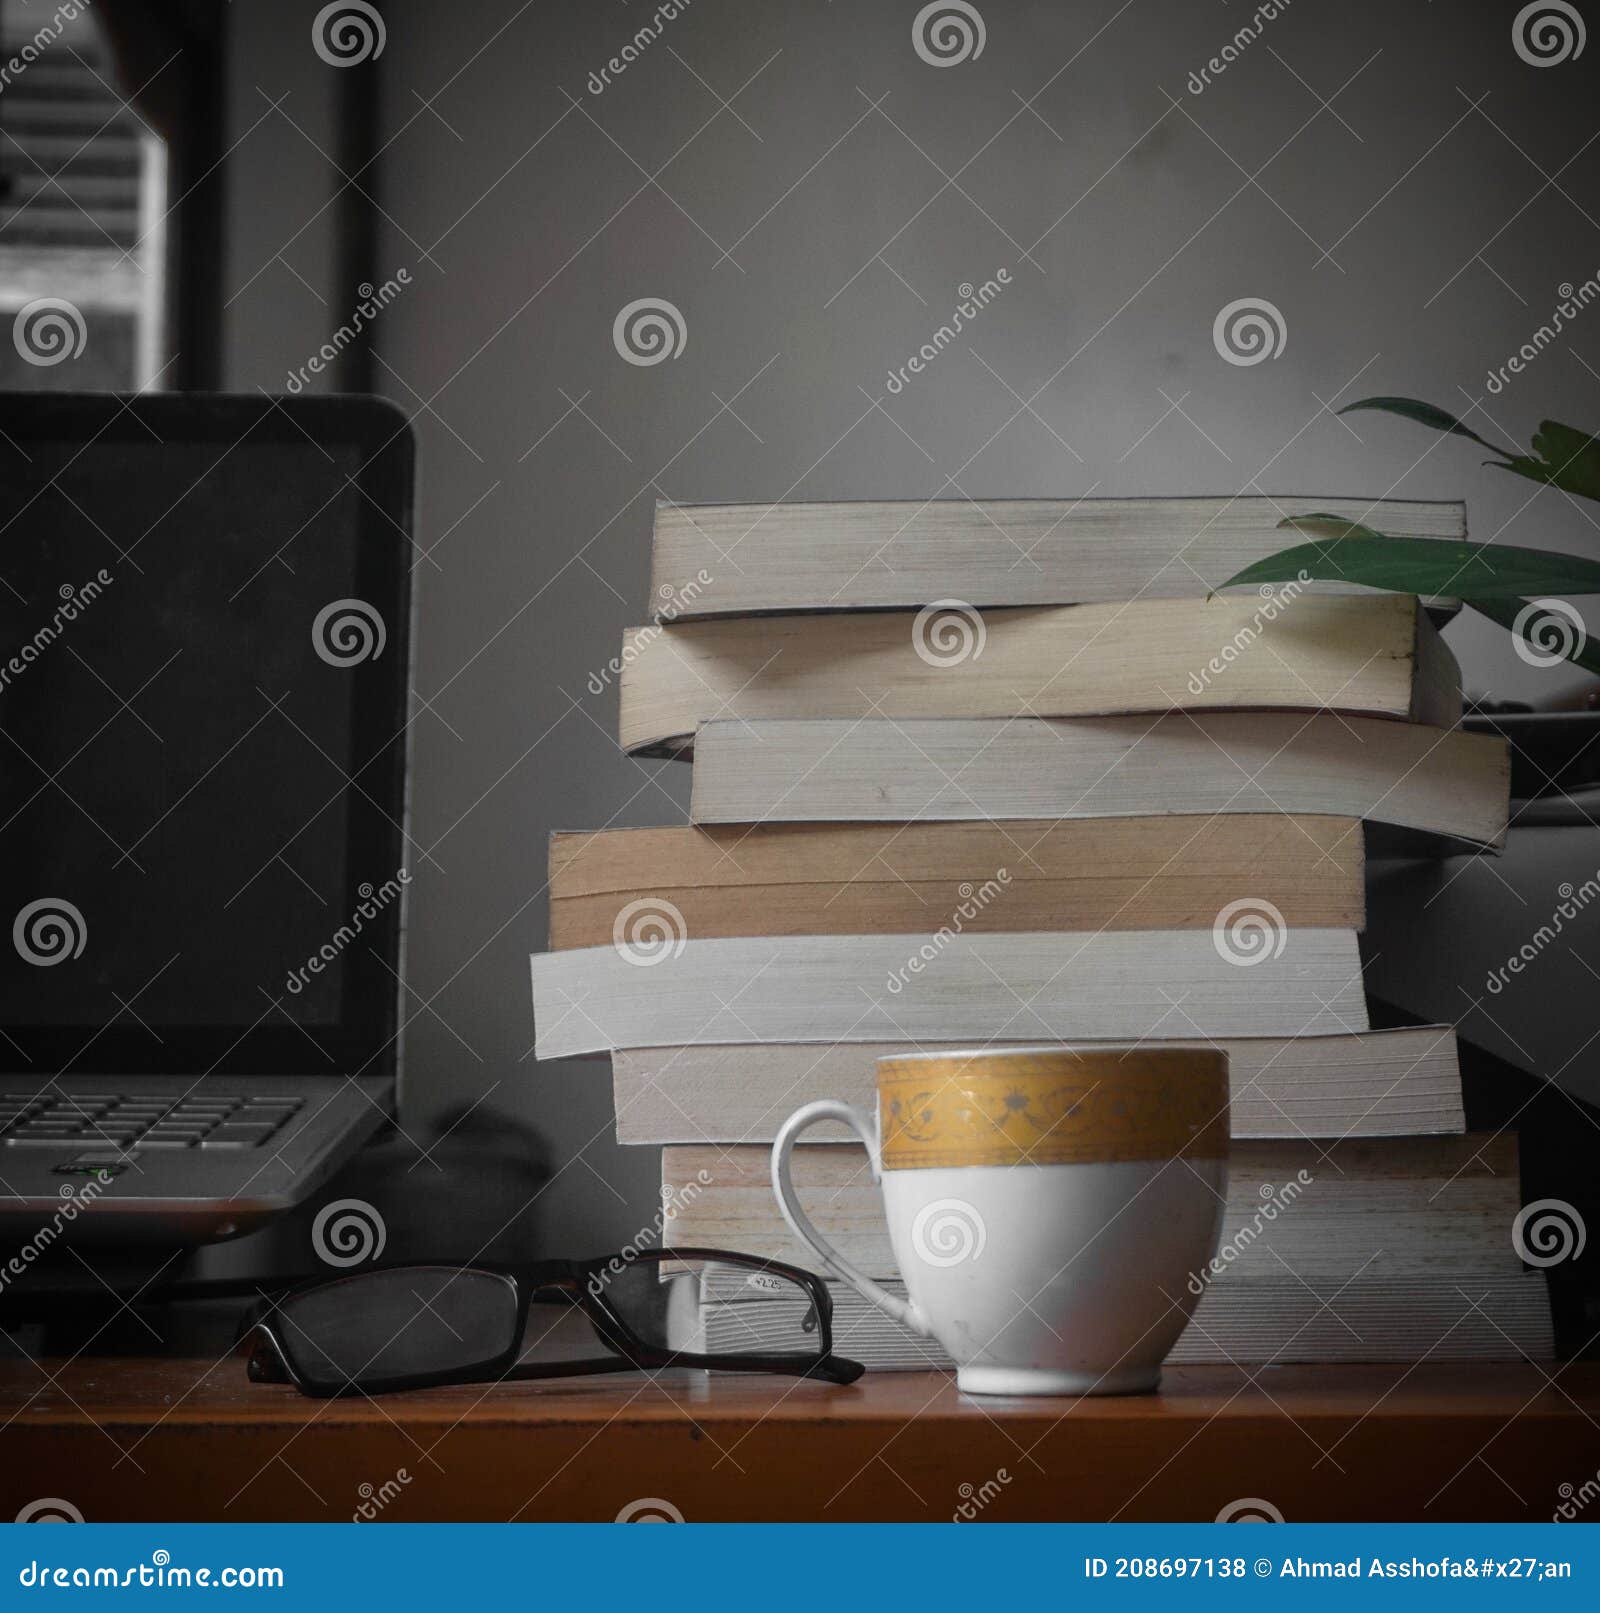 stack of books and coffee, glass, and laptopp